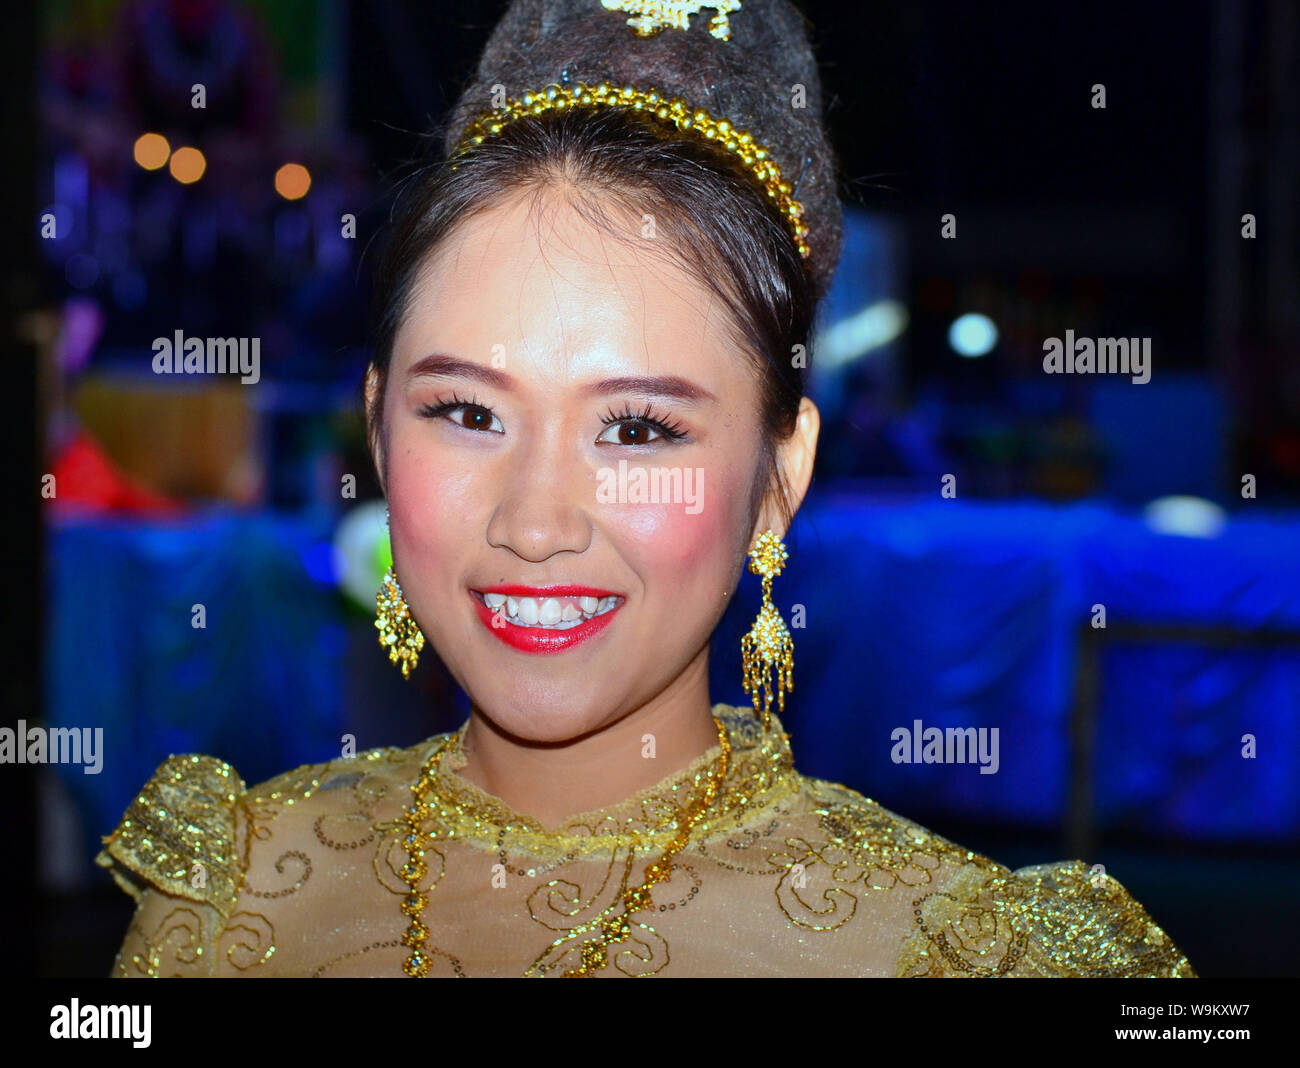 Dressed Up Thai Girl Wears A Golden Lanna Style Lace Dress And Elaborate Hairdo With Hair